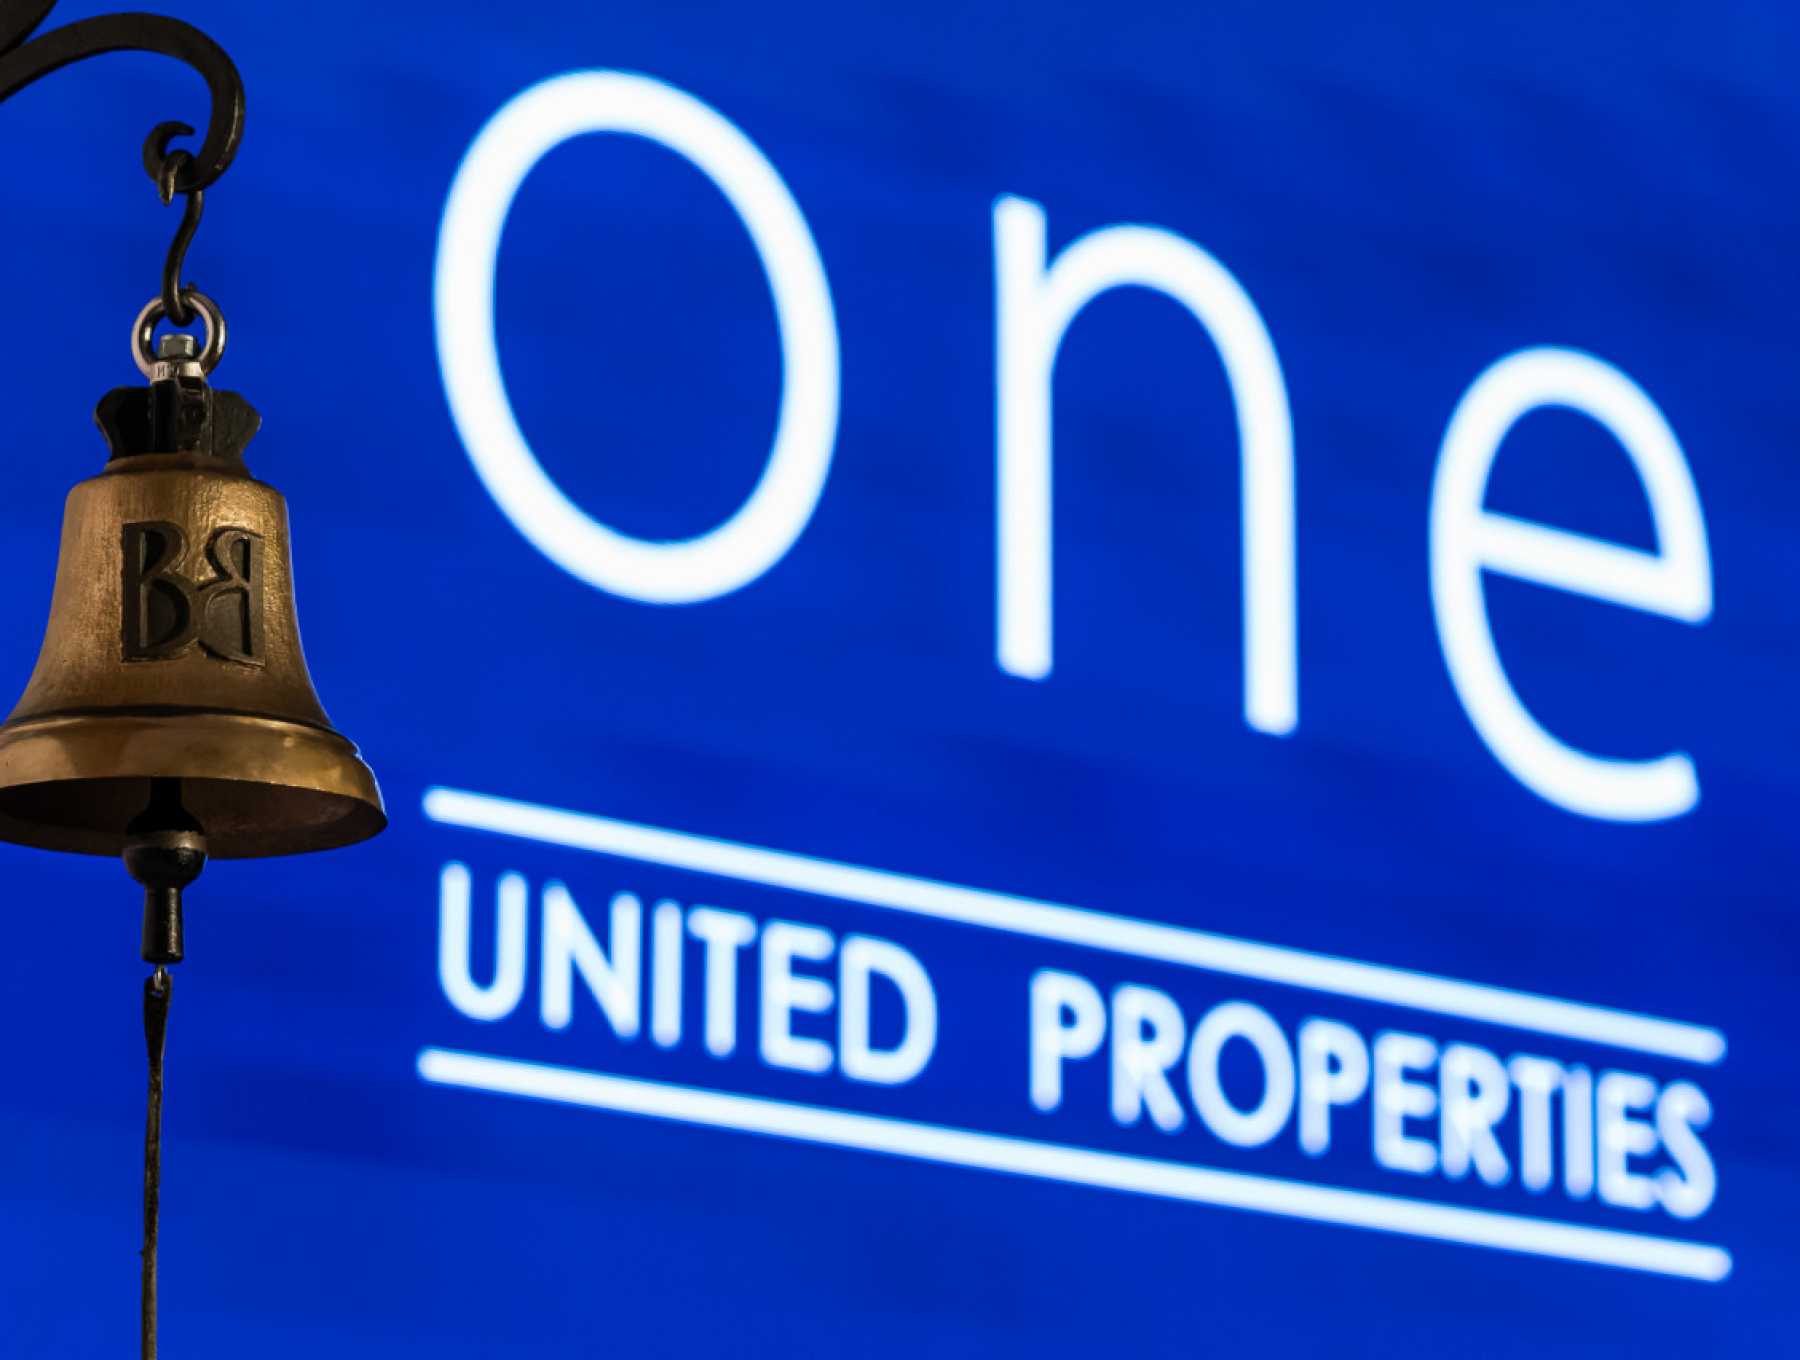 One United Properties announces the conclusion of an acquisition of a majority stake in Bucur Obor S.A.